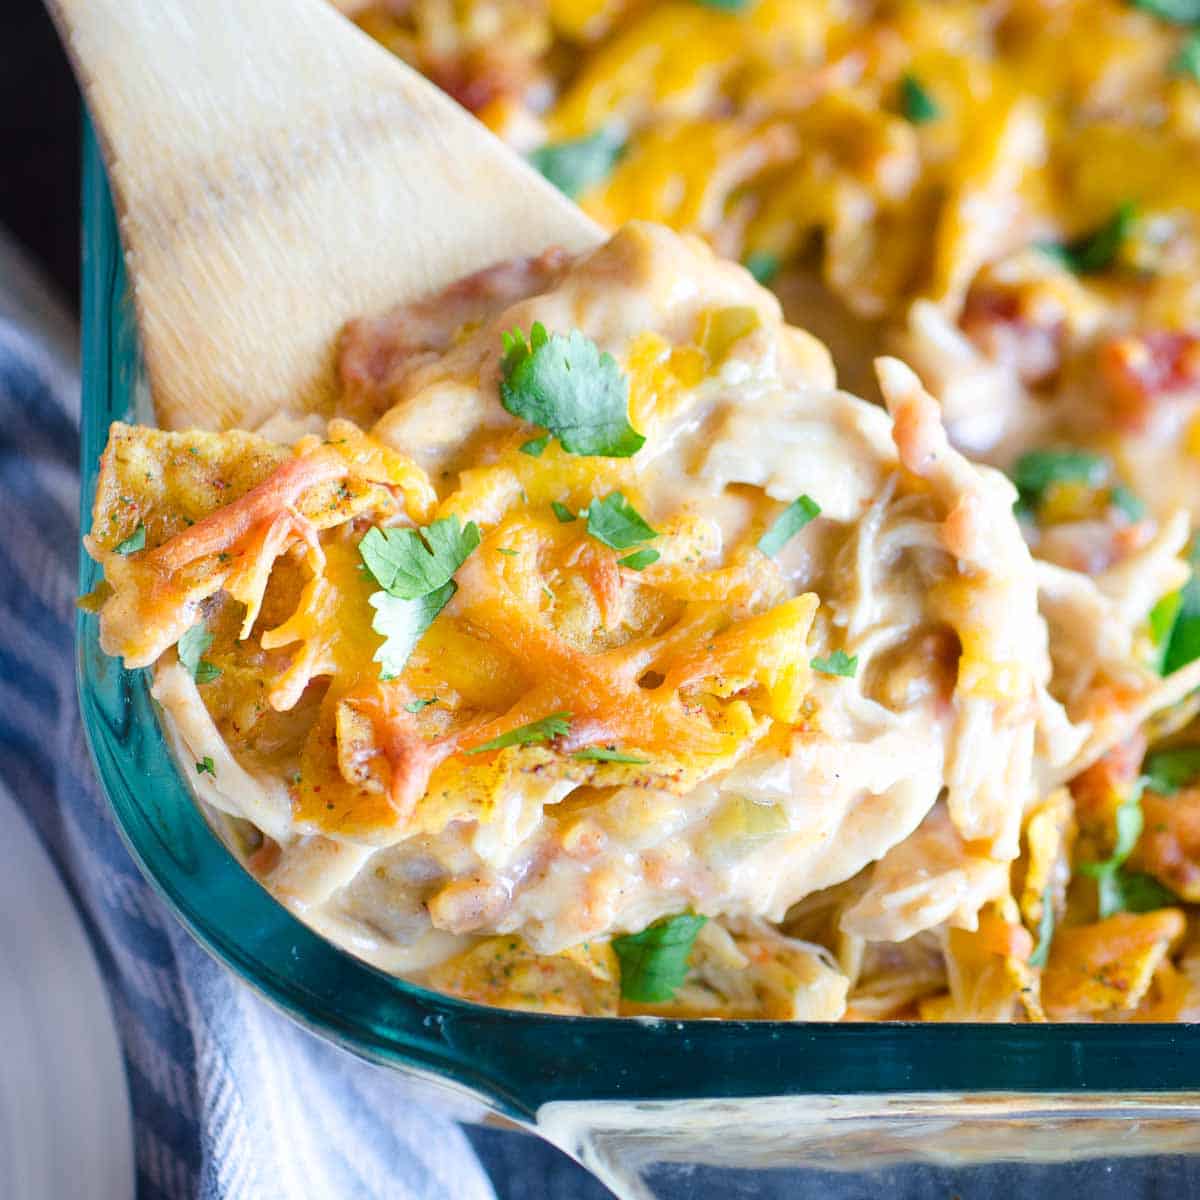 Leftover Chicken Recipes - EASY recipes that use shredded chicken!